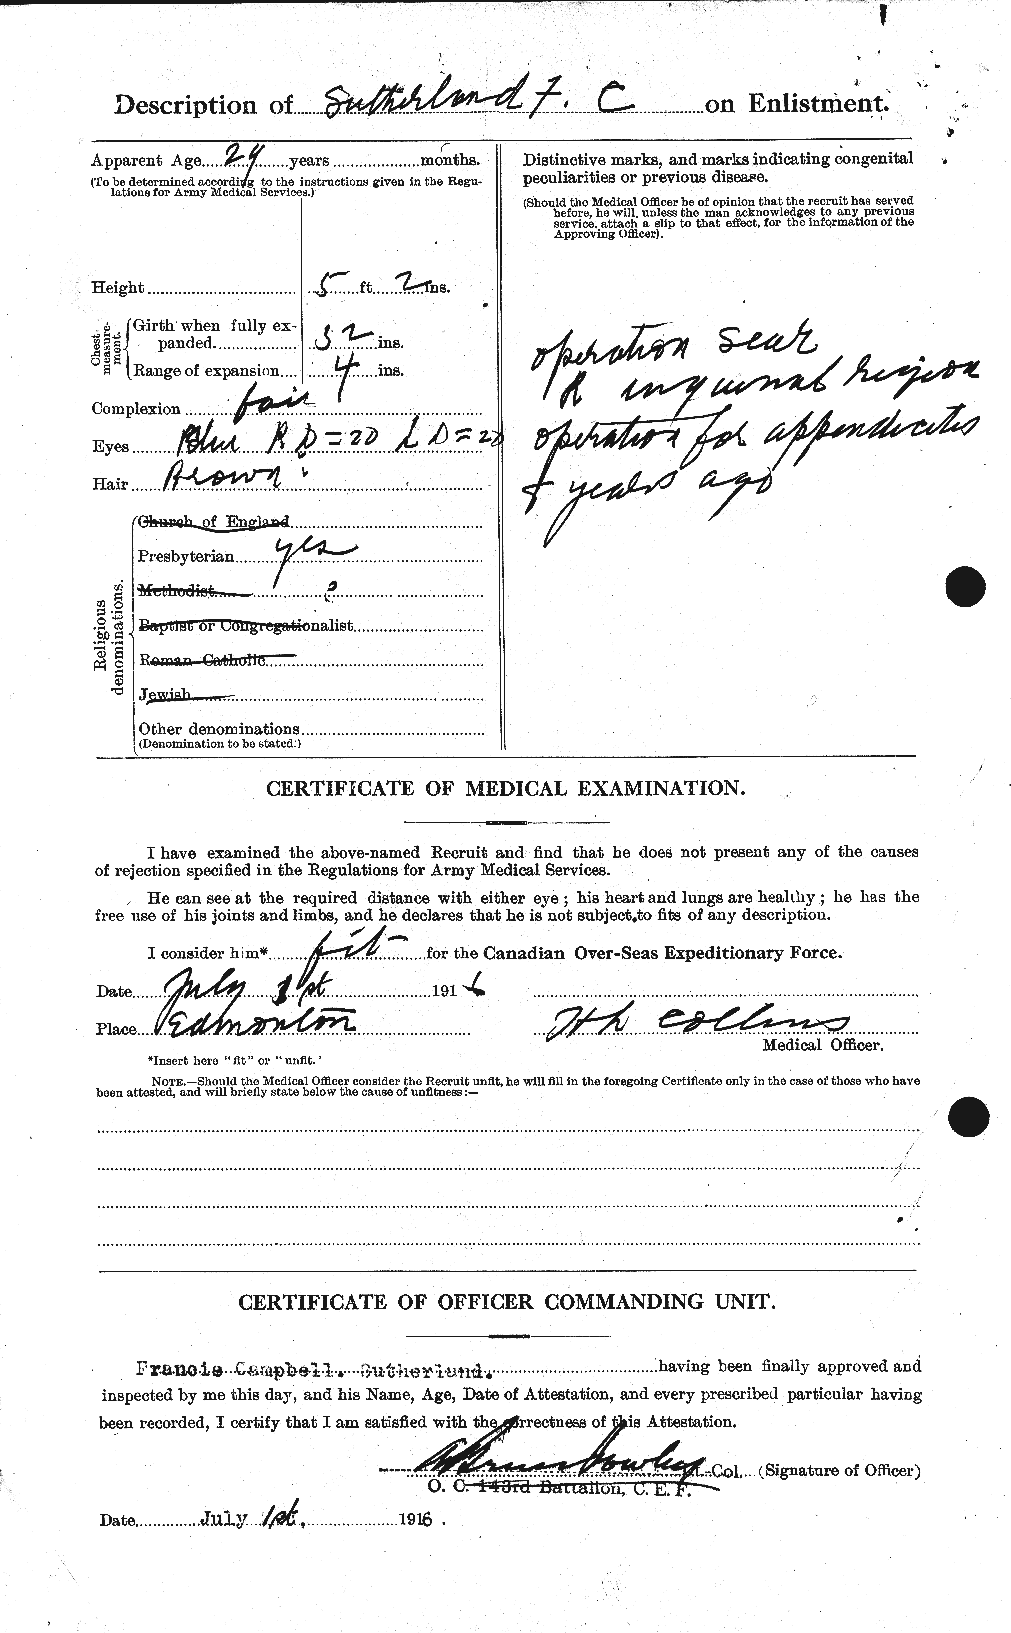 Personnel Records of the First World War - CEF 124887b